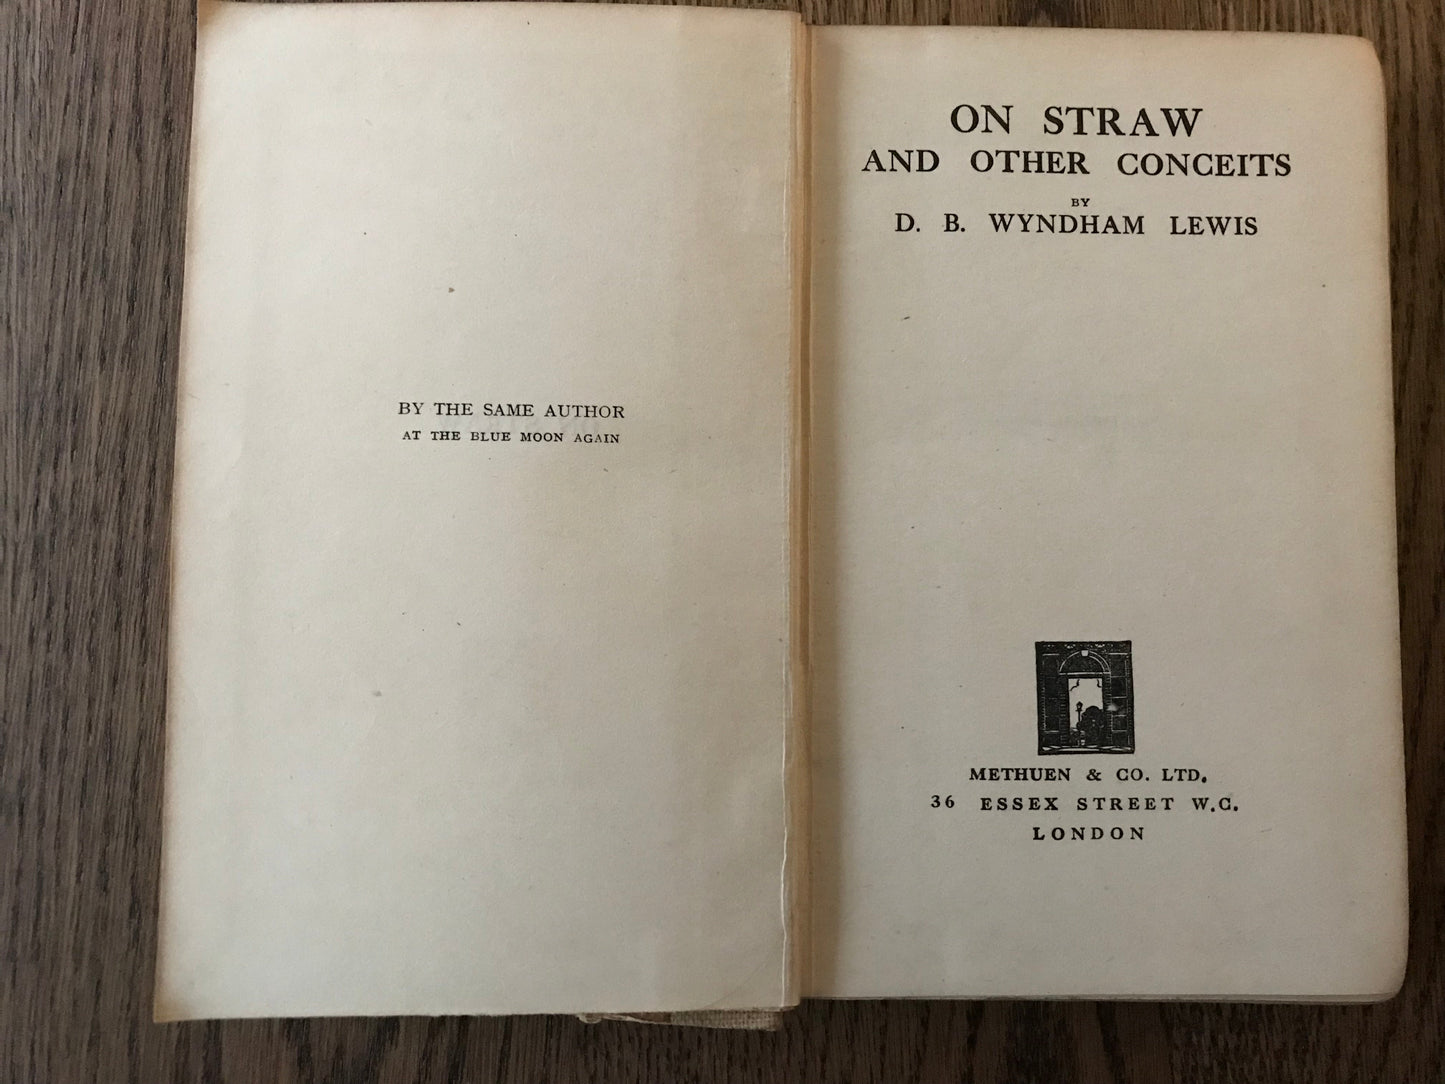 ON STRAW AND OTHER CONCEITS  - D.B. WYNDHAM LEWIS BooksCardsNBikes